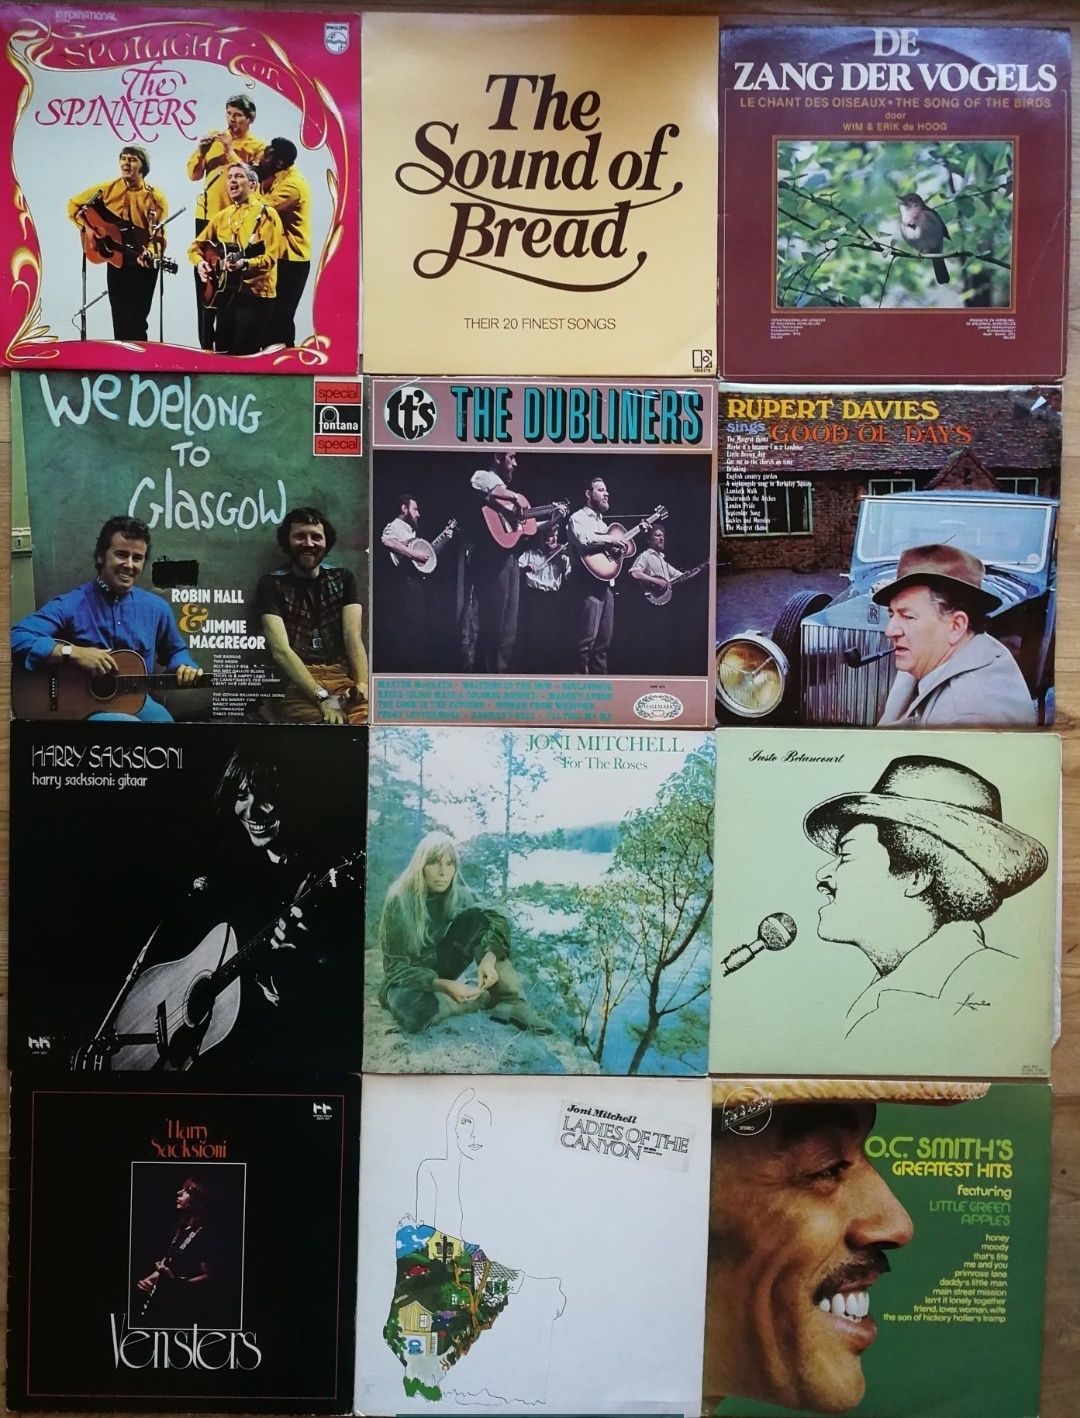 Vinil Robin Hall Jimmie MacGregor Joni Mitchell Spinners The Dubliners